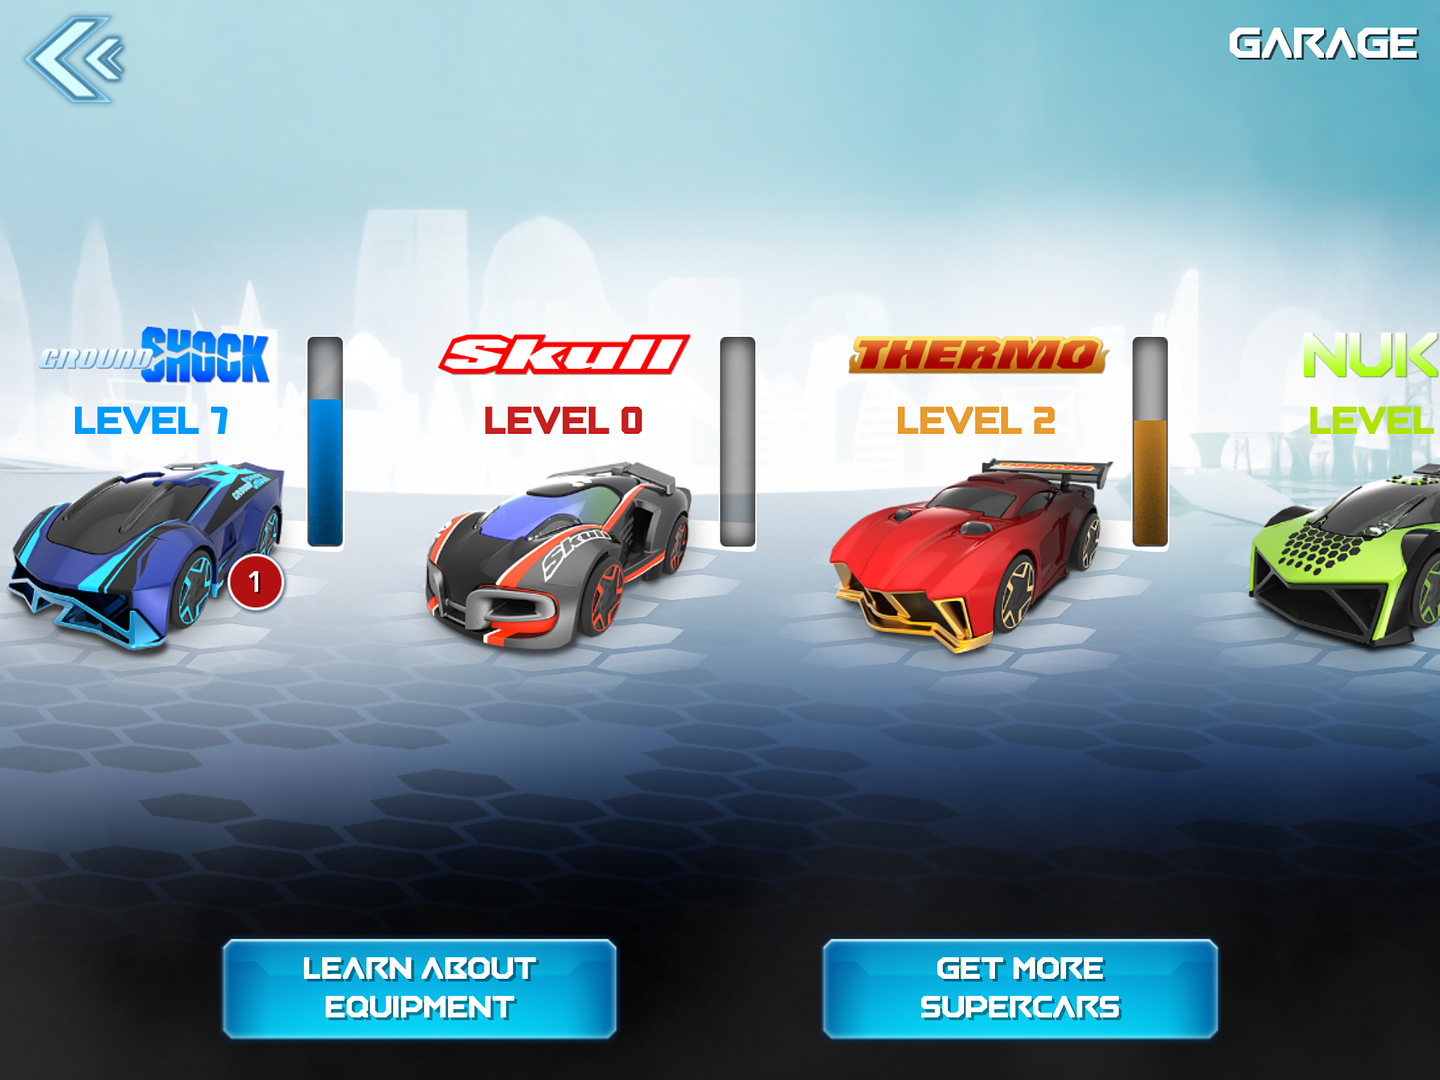 Anki OVERDRIVE uses real cars to race that you control with the app. Each has its own skills + unique battle weaponry